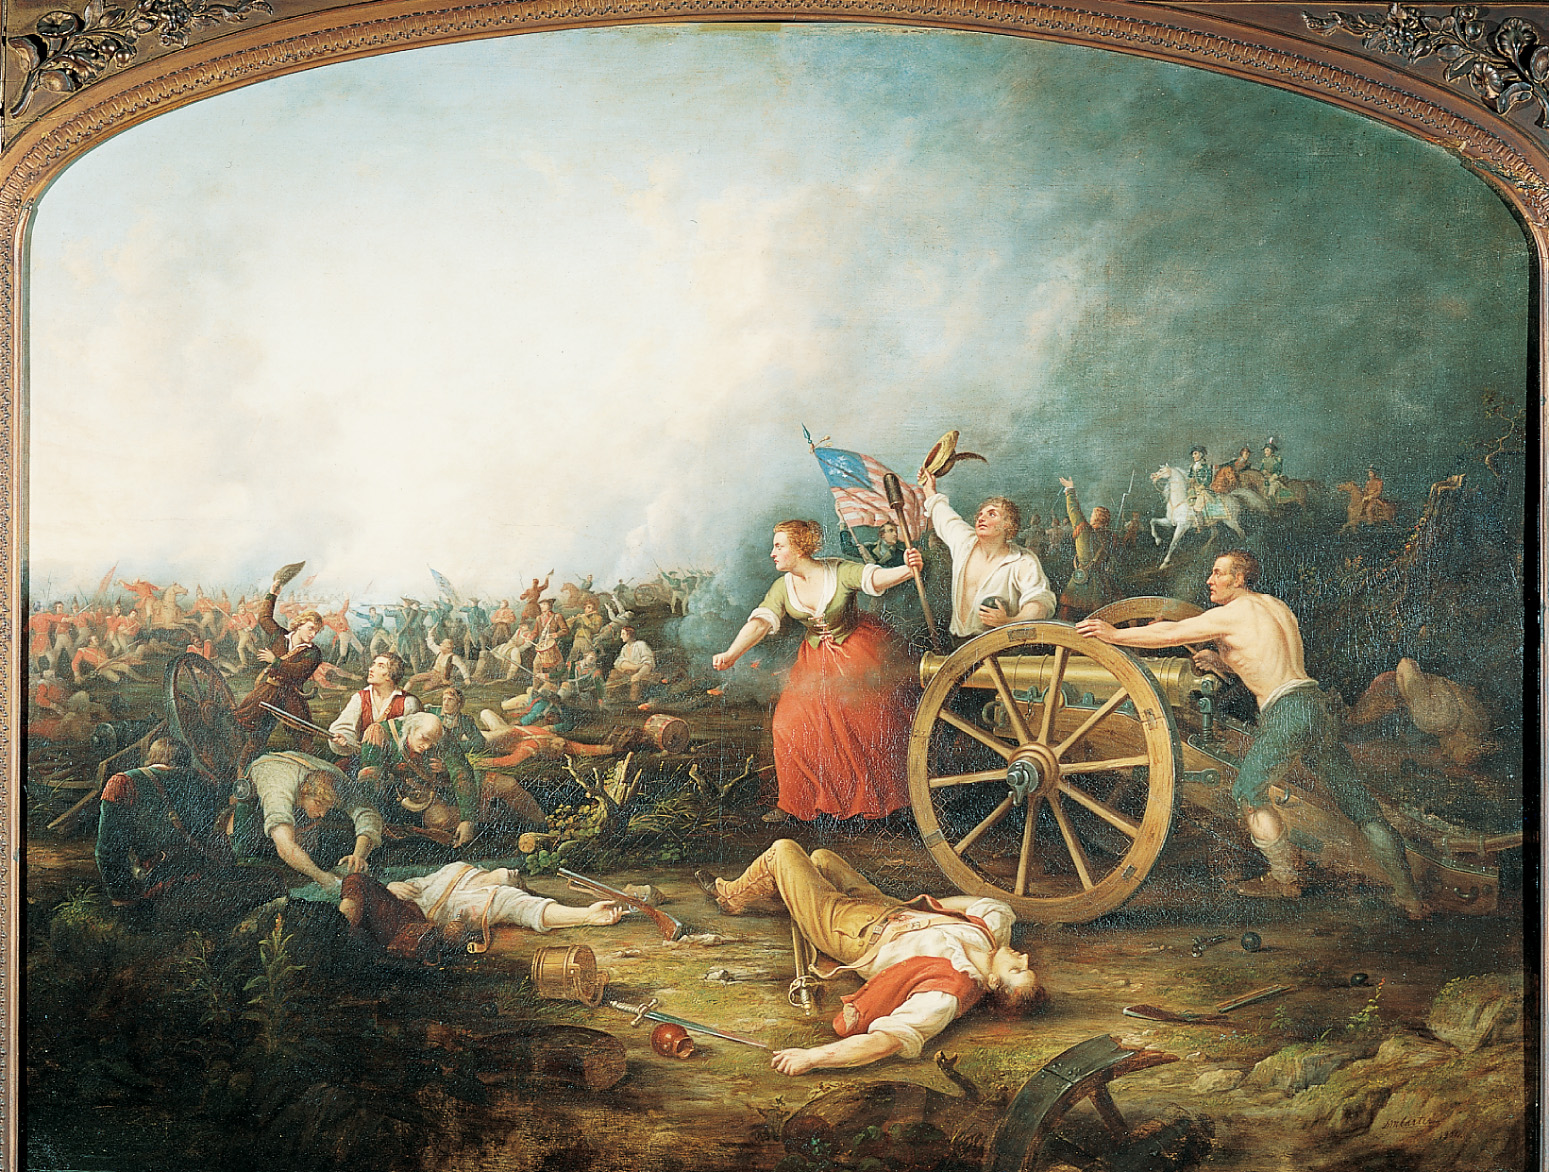 Painting: in a battle, a women in a dress fires a cannon.